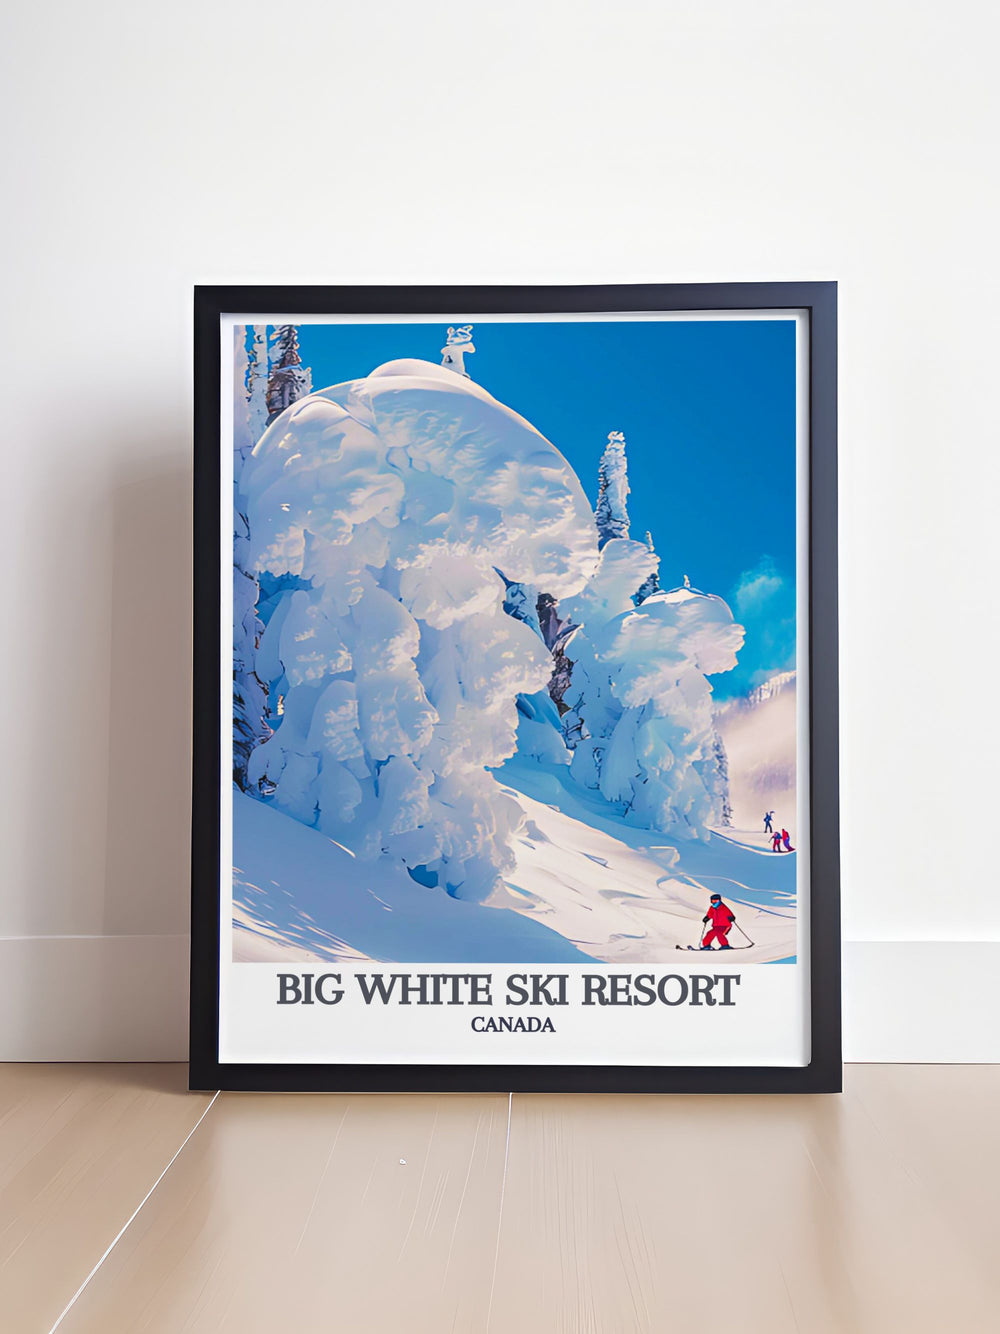 Framed art print of Big White Ski Resort featuring the ethereal snow ghosts, offering a breathtaking view of one of Canadas premier ski destinations and a must have for winter sports enthusiasts.